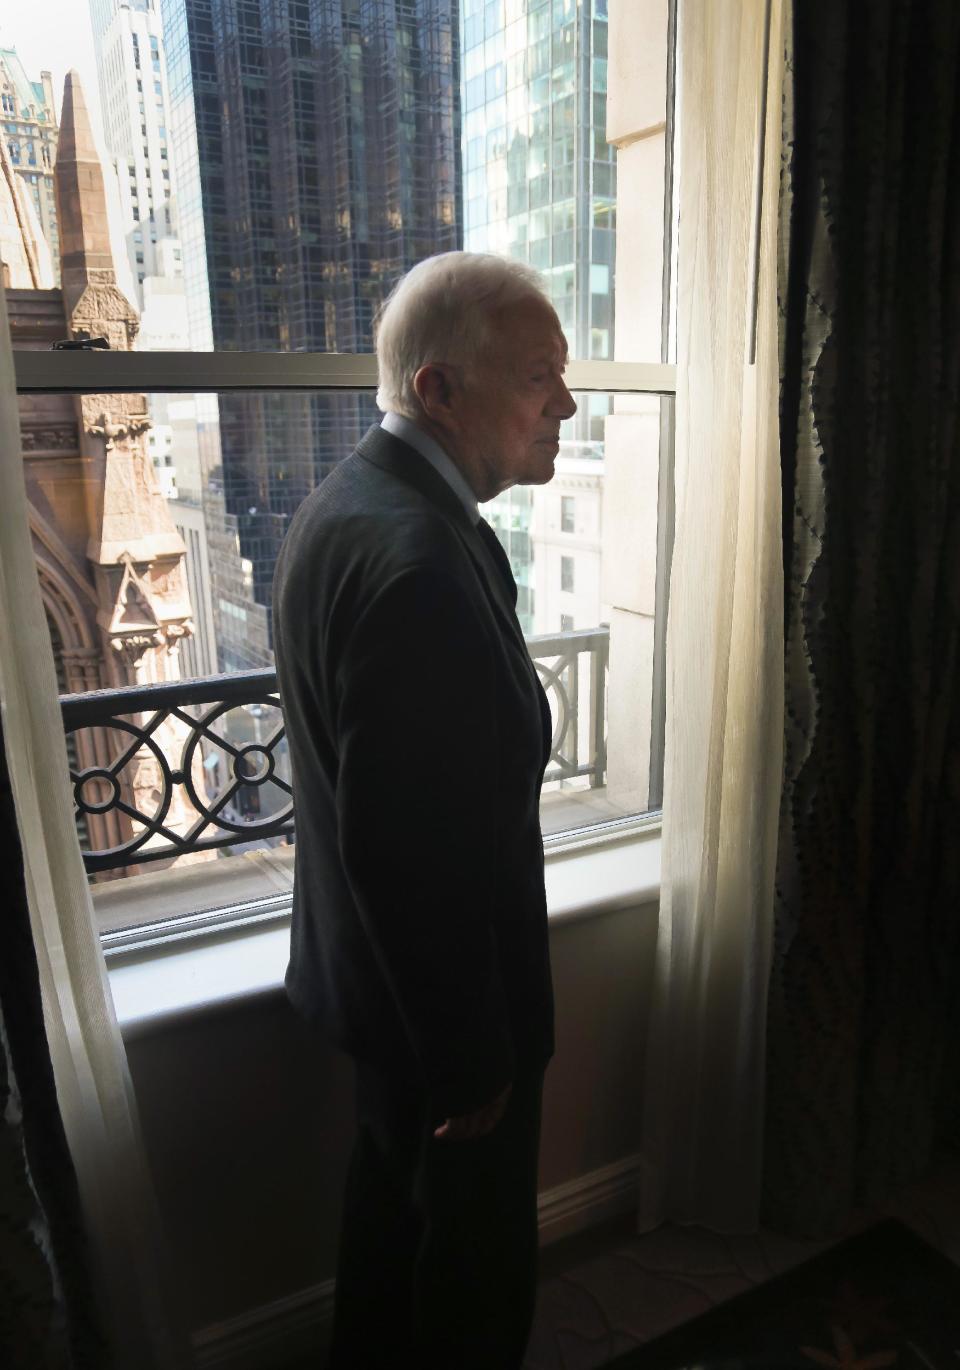 Former U.S. President Jimmy Carter pose by his hotel room window after an interview on Monday March 24, 2014 in New York. Carter says he doesn't support the Palestinian-led "boycott, divest, sanction" campaign against Israel but says products made in Israel-occupied Palestinian territories should be clearly labeled. (AP Photo/Bebeto Matthews)